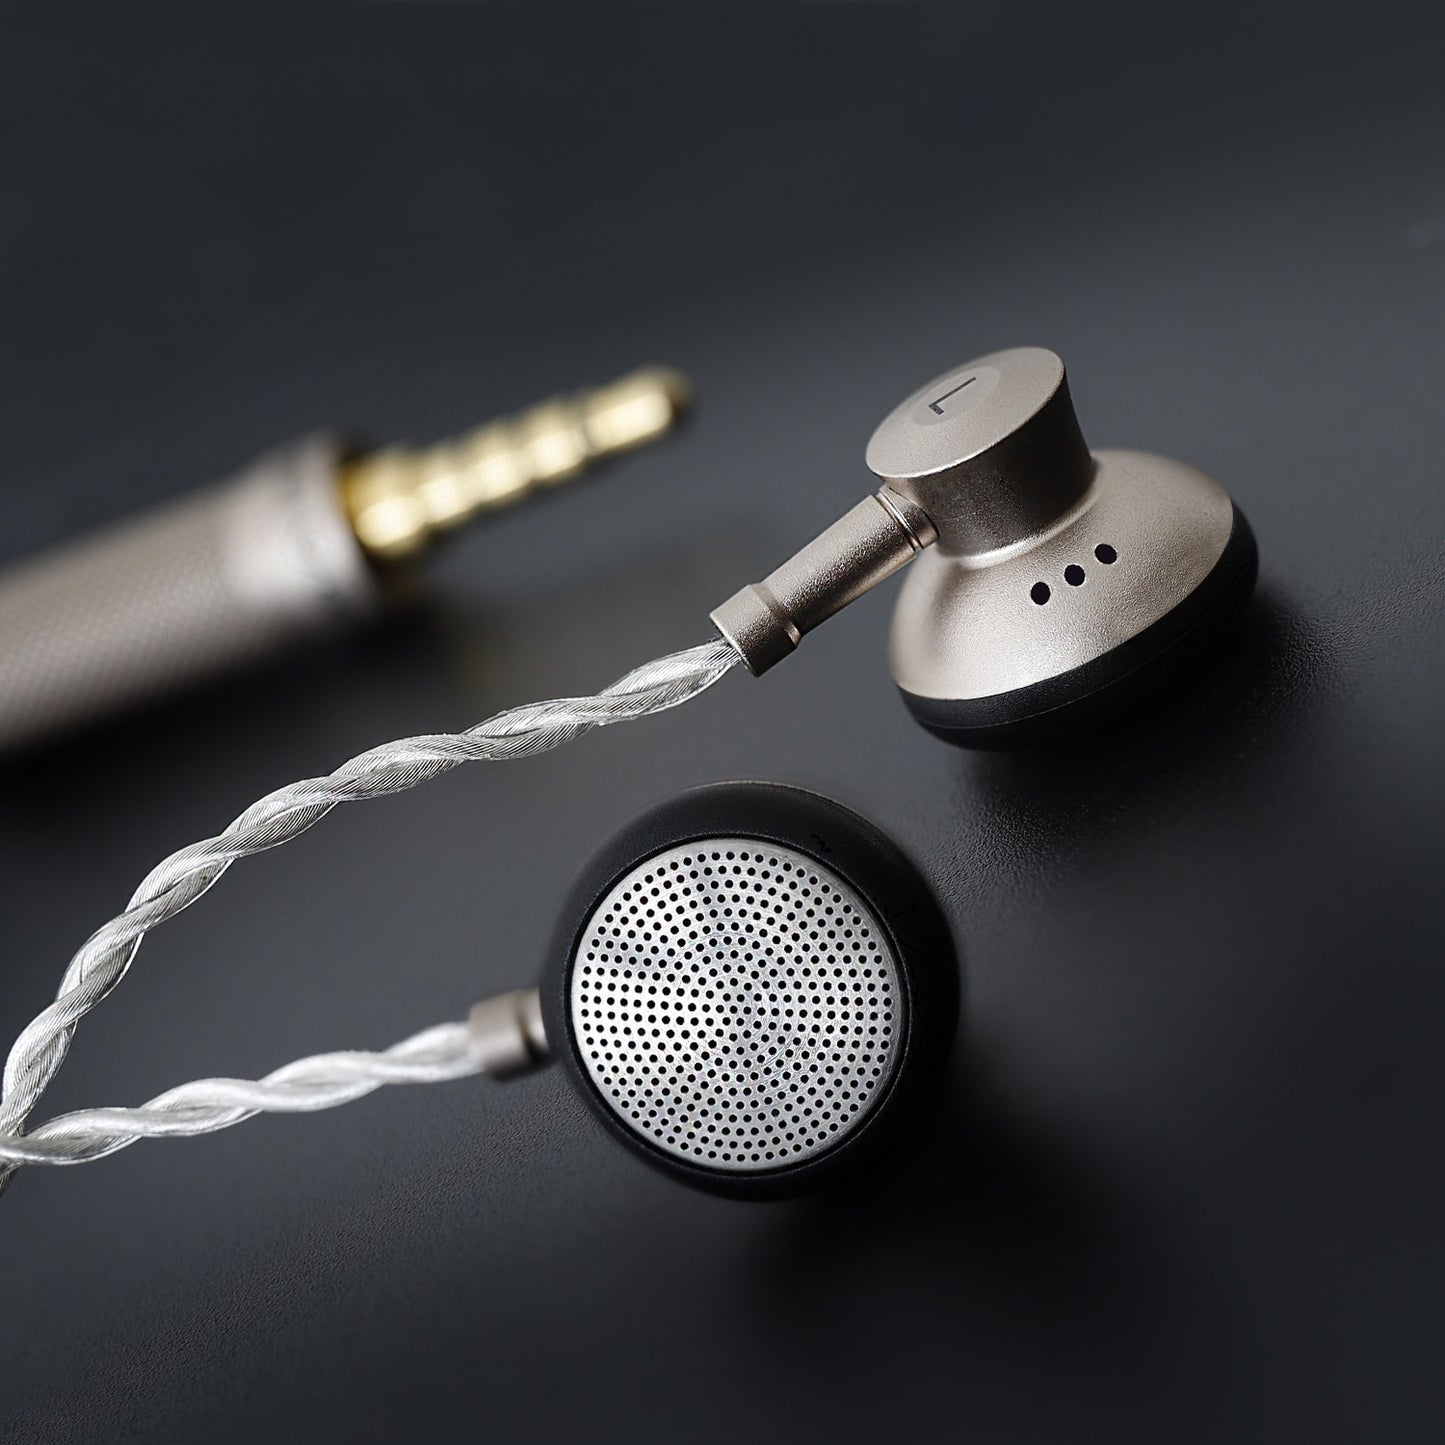 SIVGA M200 Wired 3.5mm Jack in-Ear Earbud